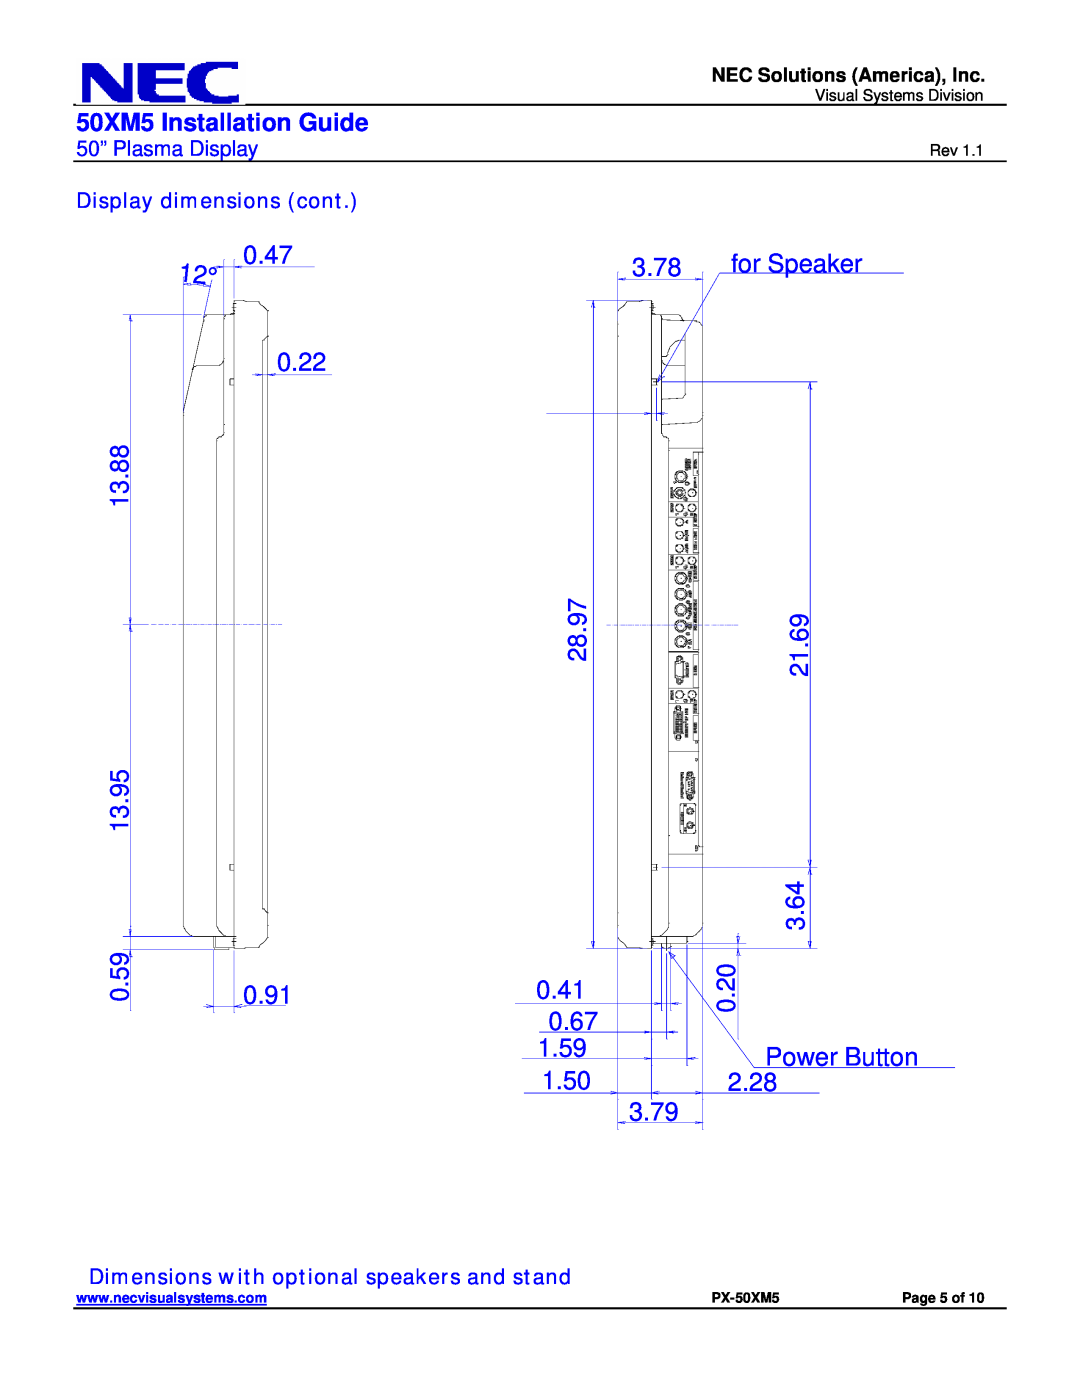 NEC Dimensions with optional speakers and stand, 50XM5 Installation Guide, 0.47, 0.59, 0.91, 0.41, 0.67, PX-50XM5 